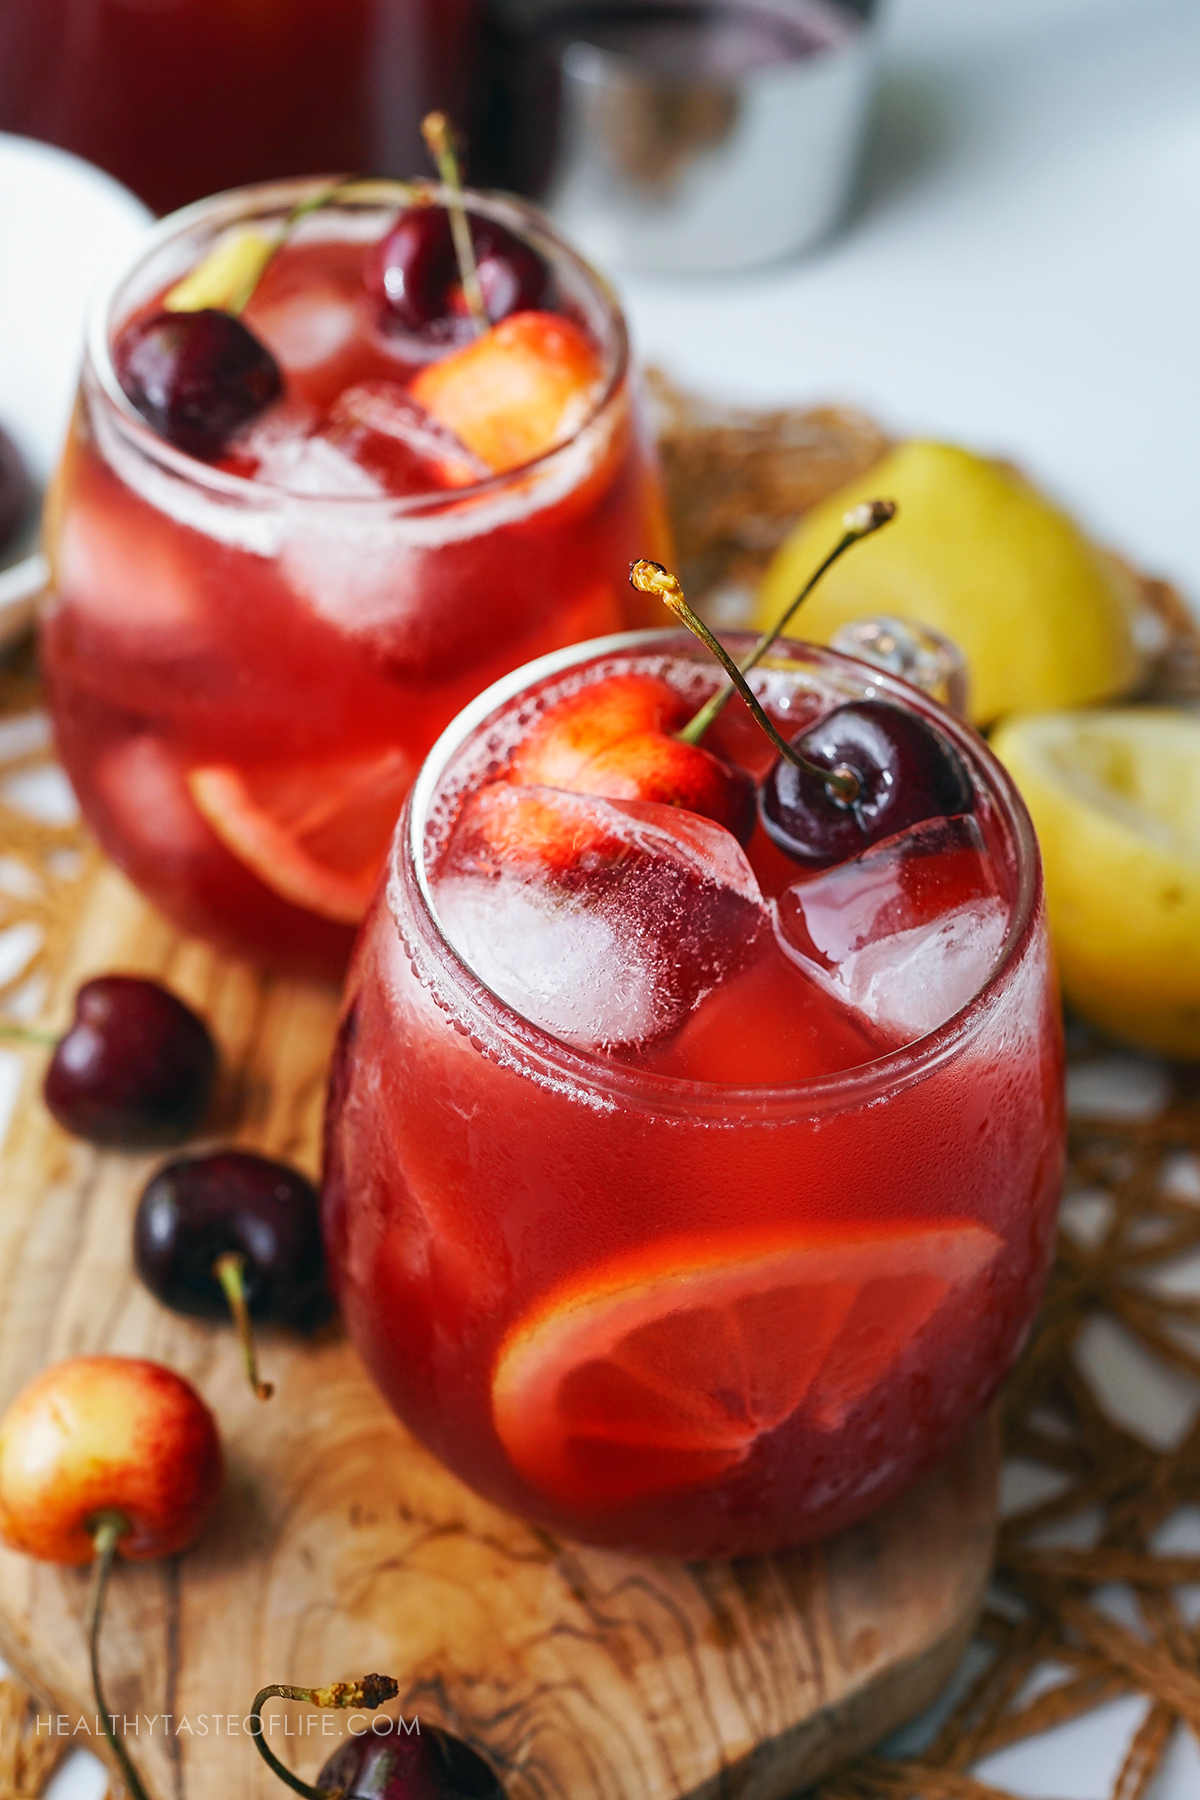 Cherry lemonade served in glasses over ice, garnished with fresh cherries and a slice of lemon.